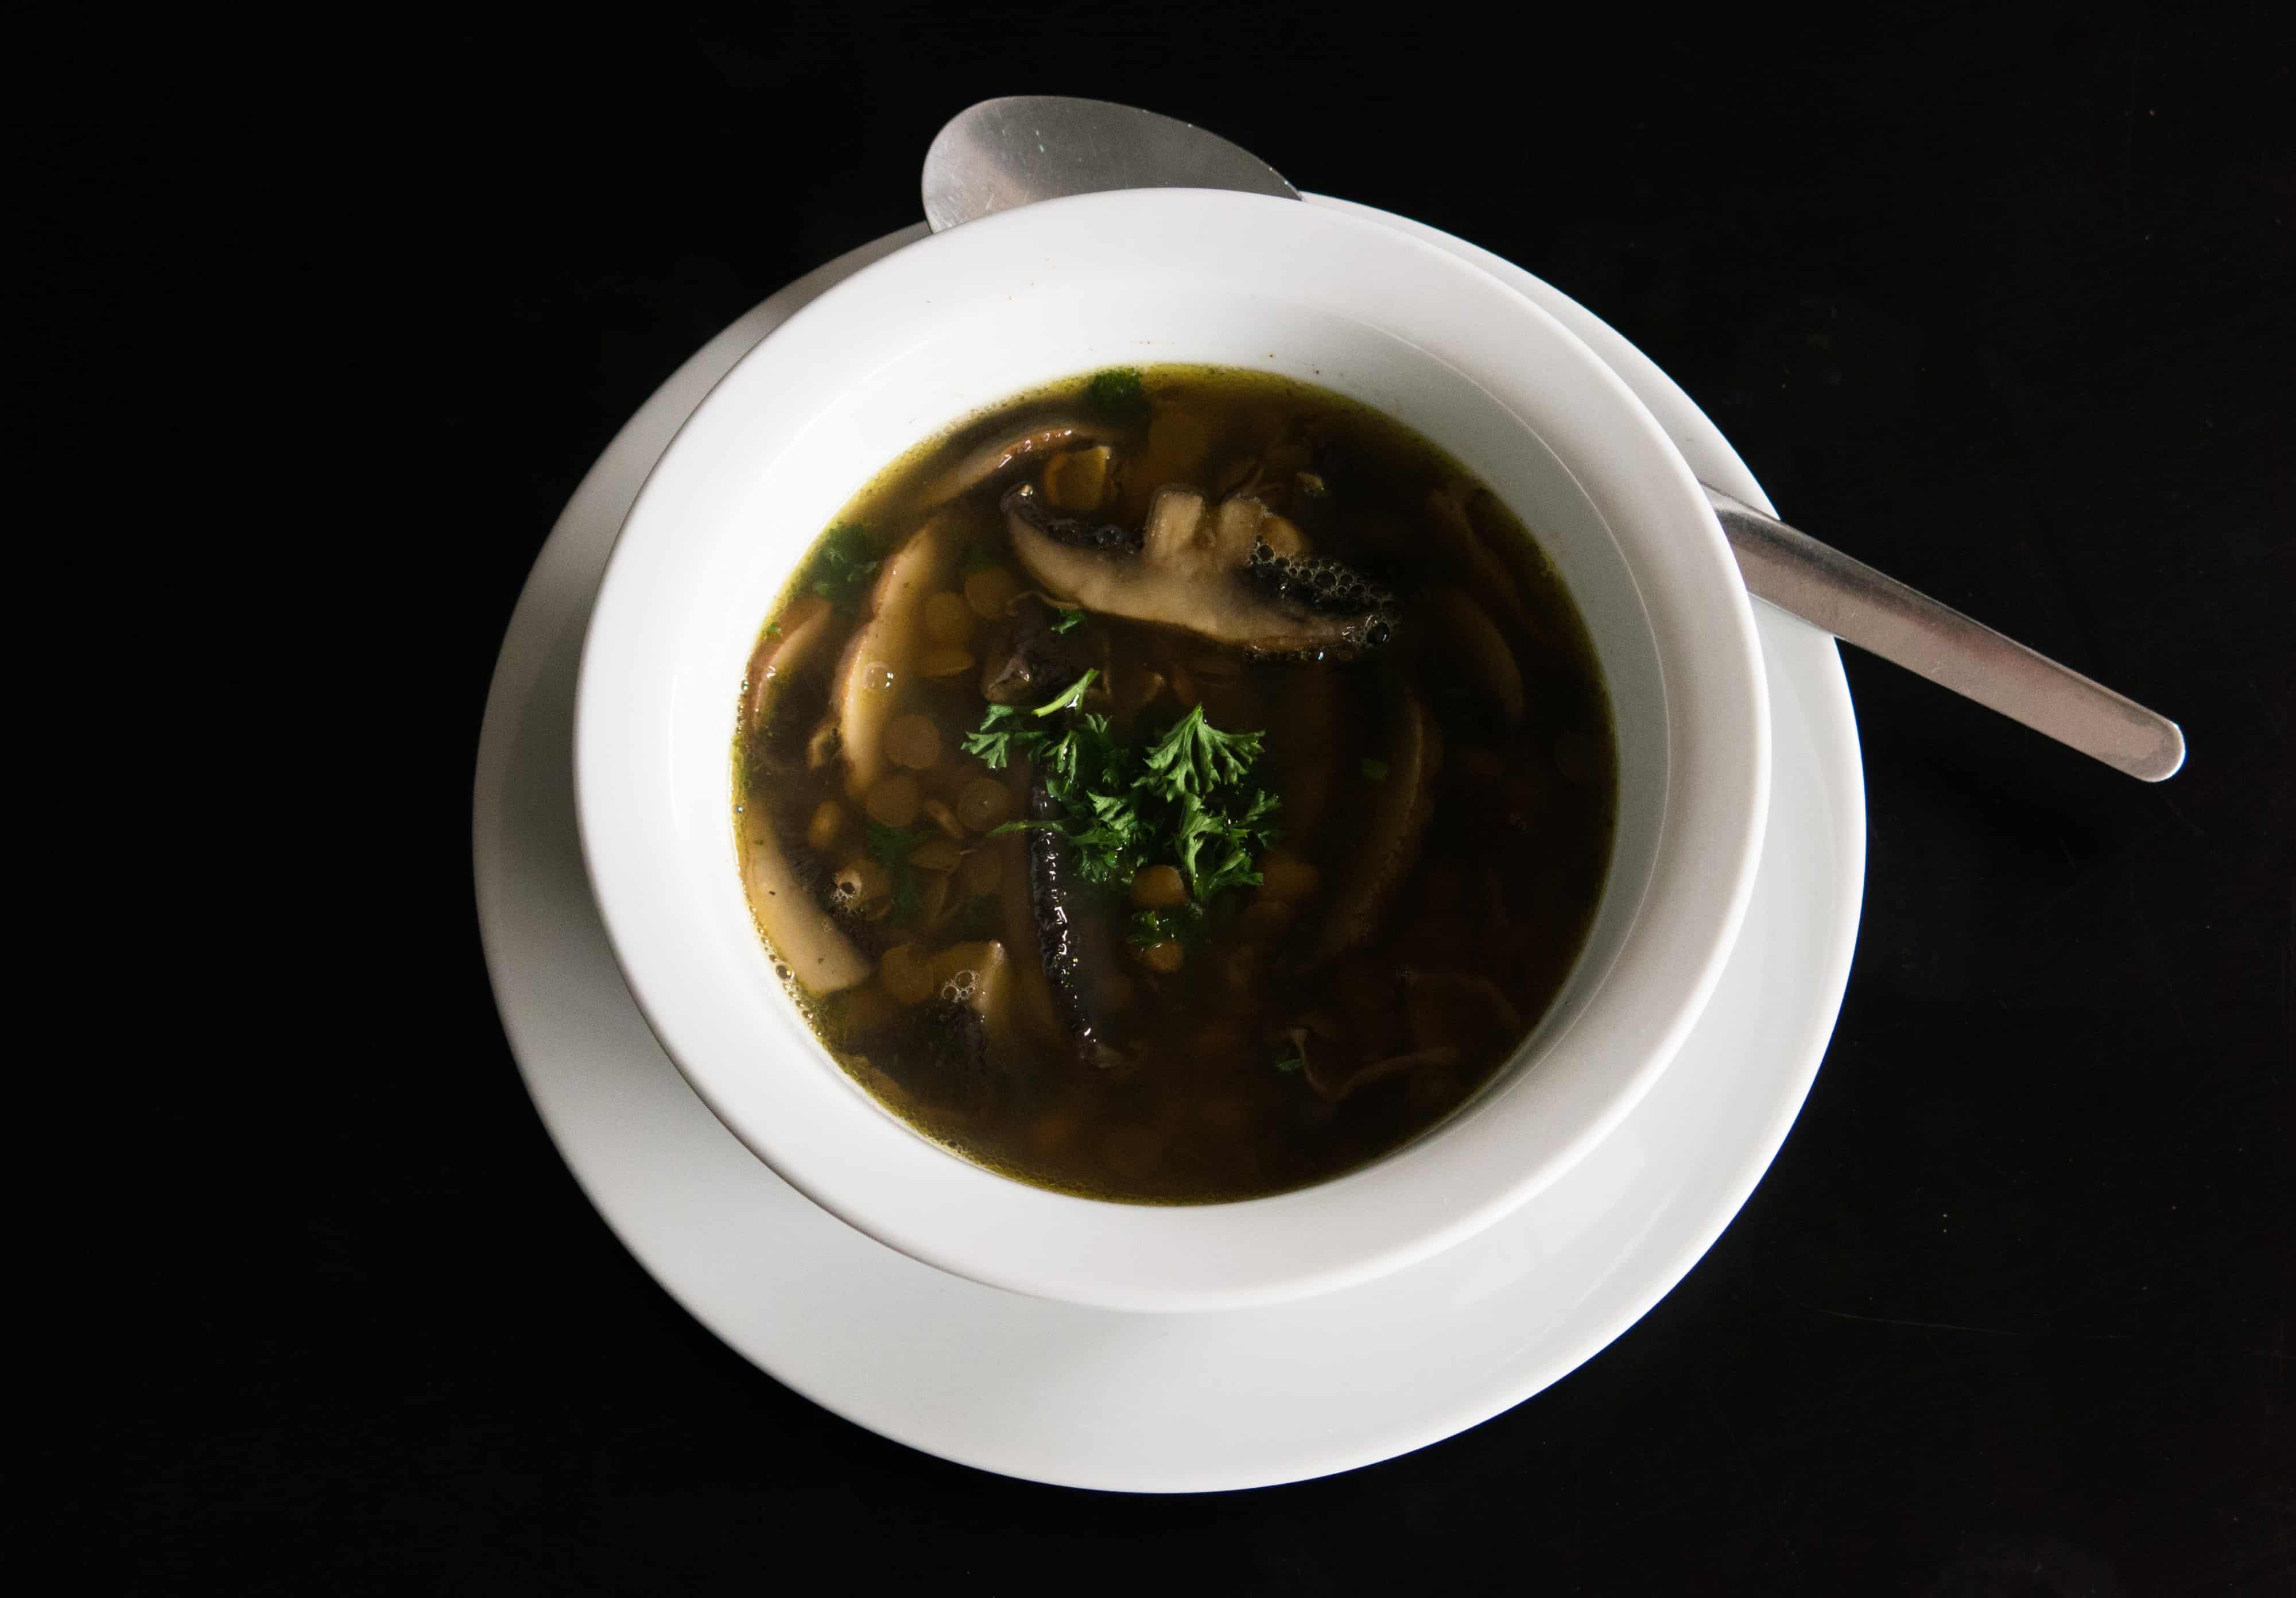 Lentil and Mushroom Soup with parsley. Gluten free, vegan and delicious.